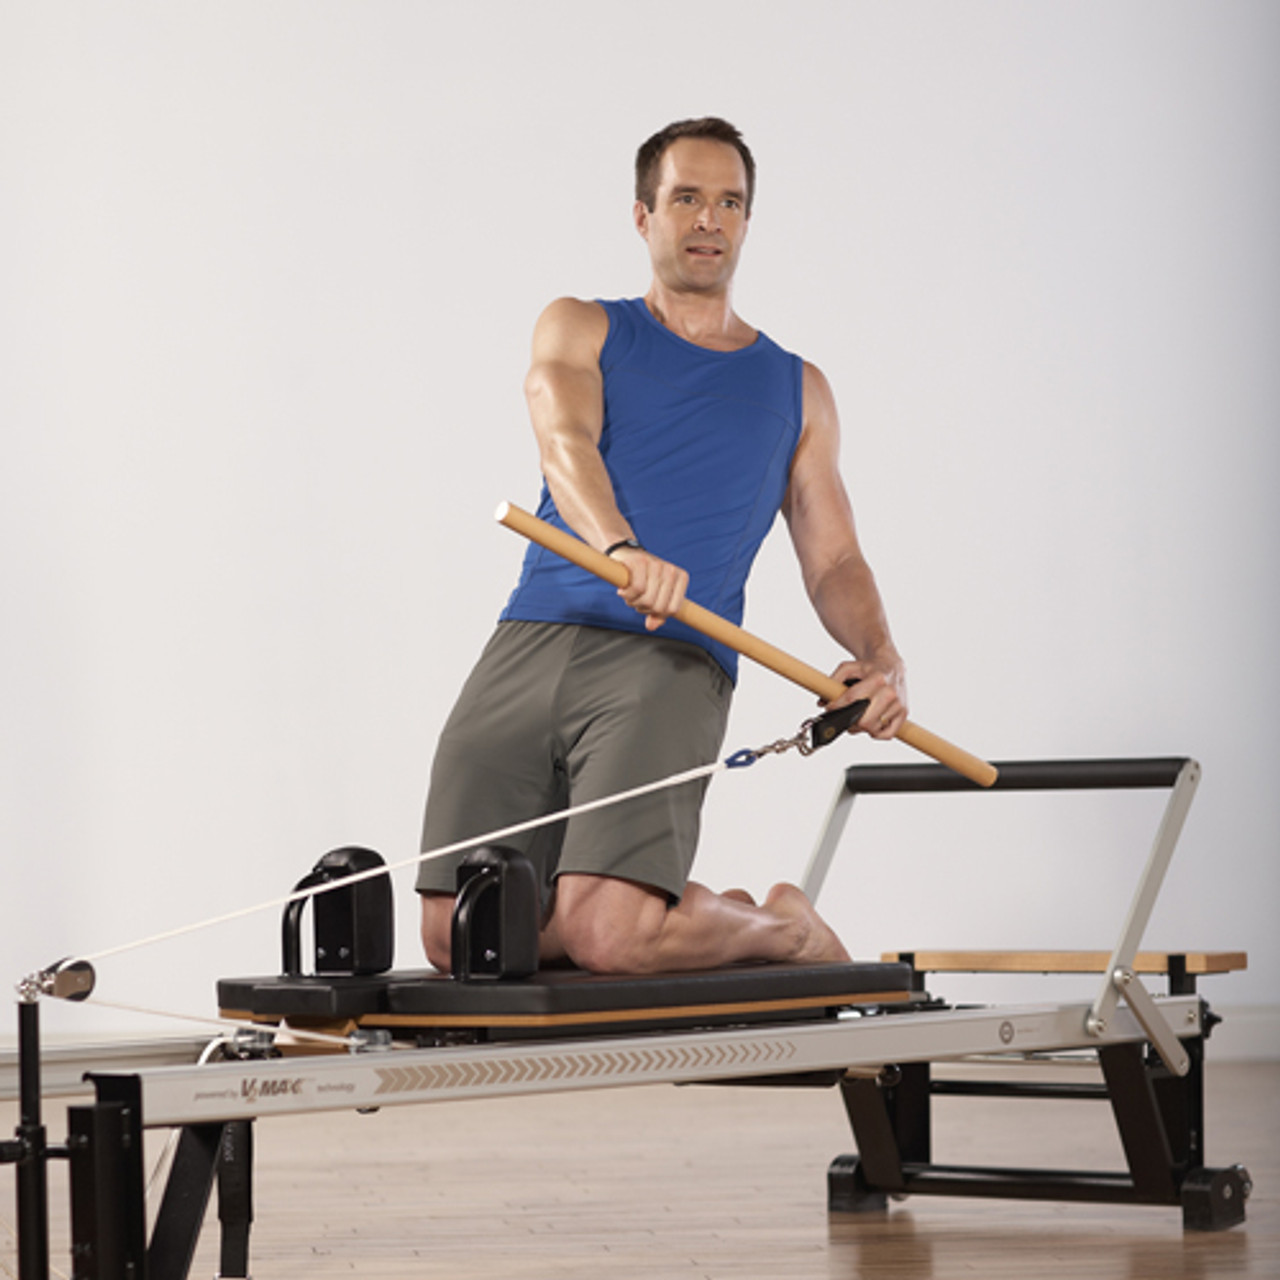  Merrithew Reformer Box with Footstrap, Extra Long